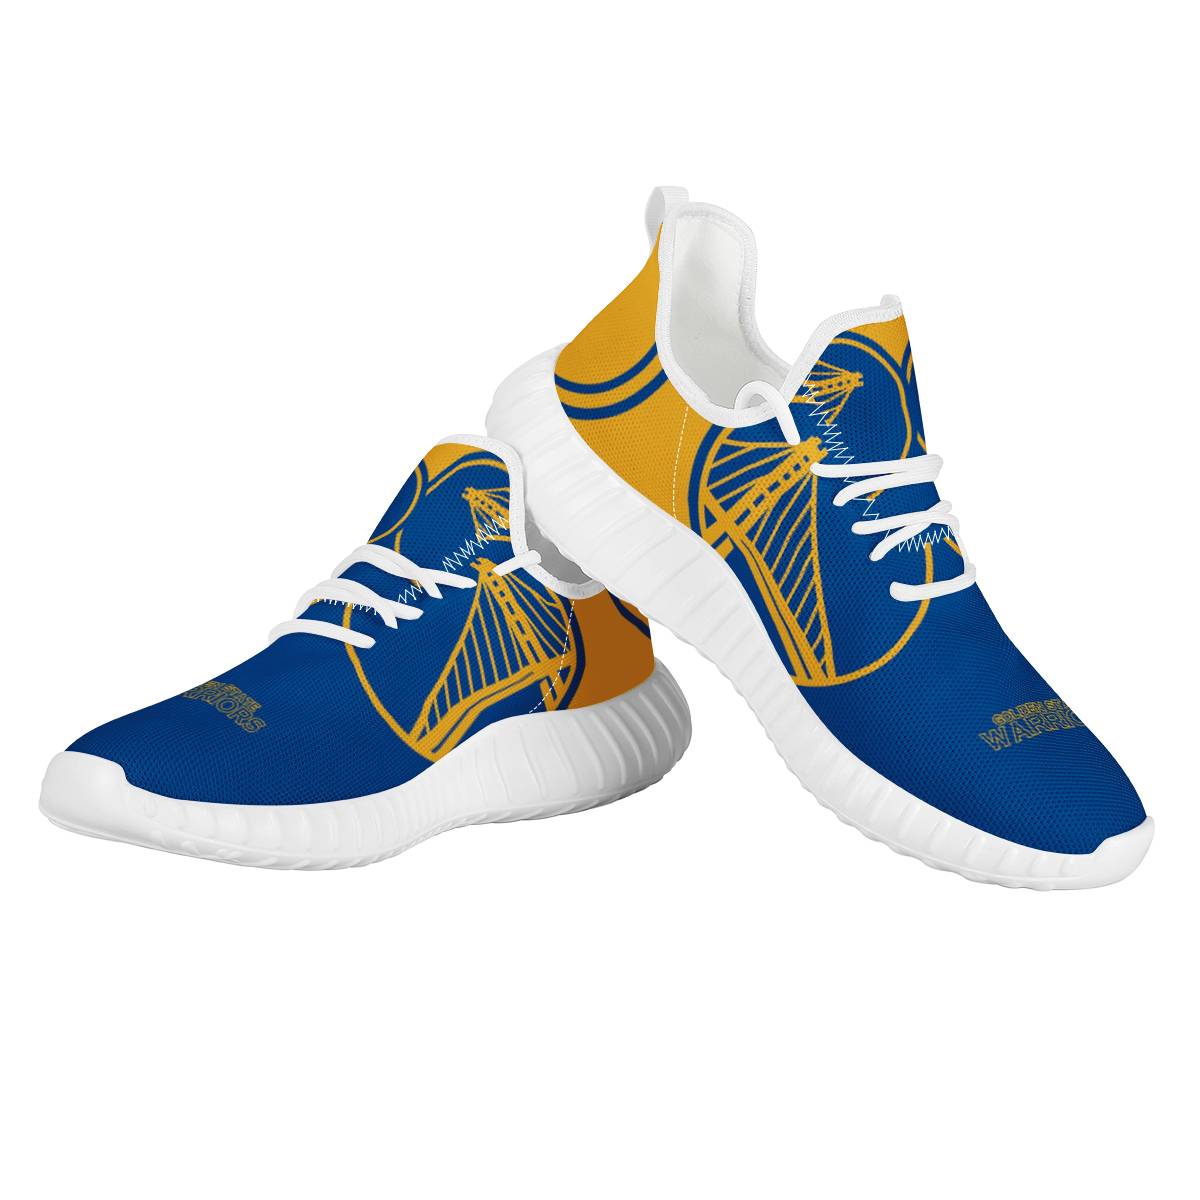 Women's Golden State Warriors Mesh Knit Sneakers/Shoes 004